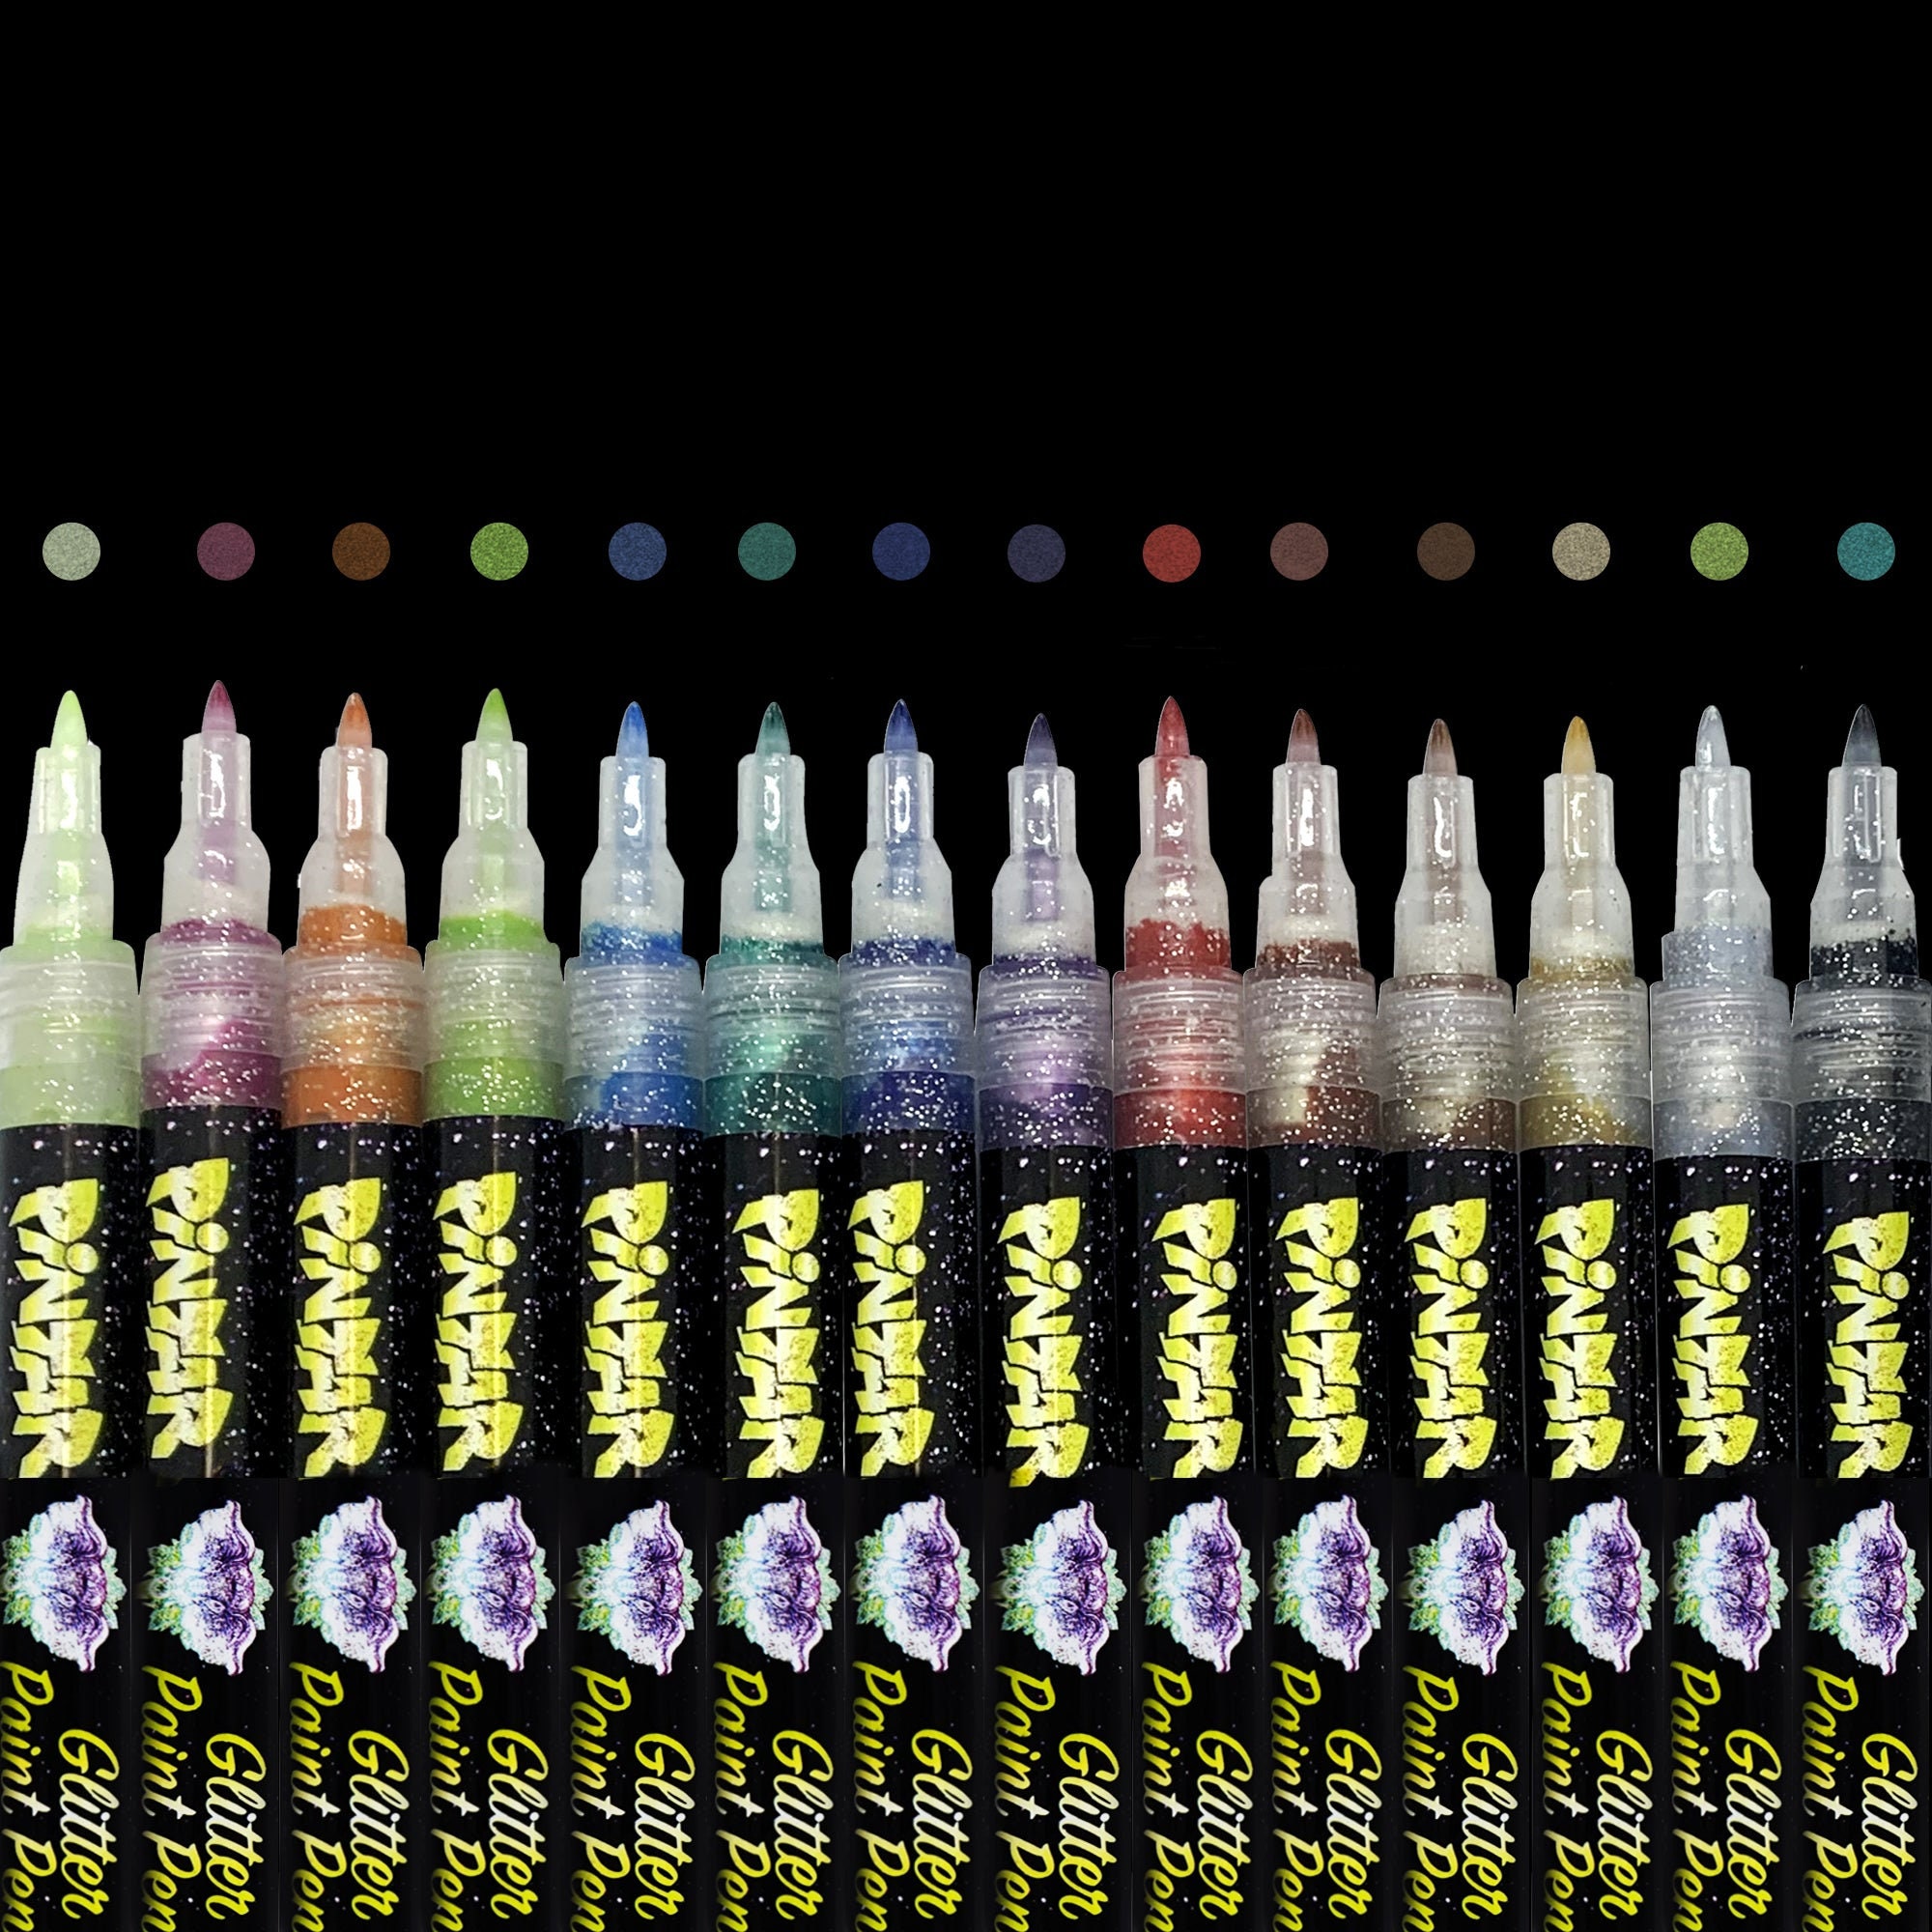 Pintar Acrylic Paint Markers - 16 Pack Fine Tip (1.0mm)